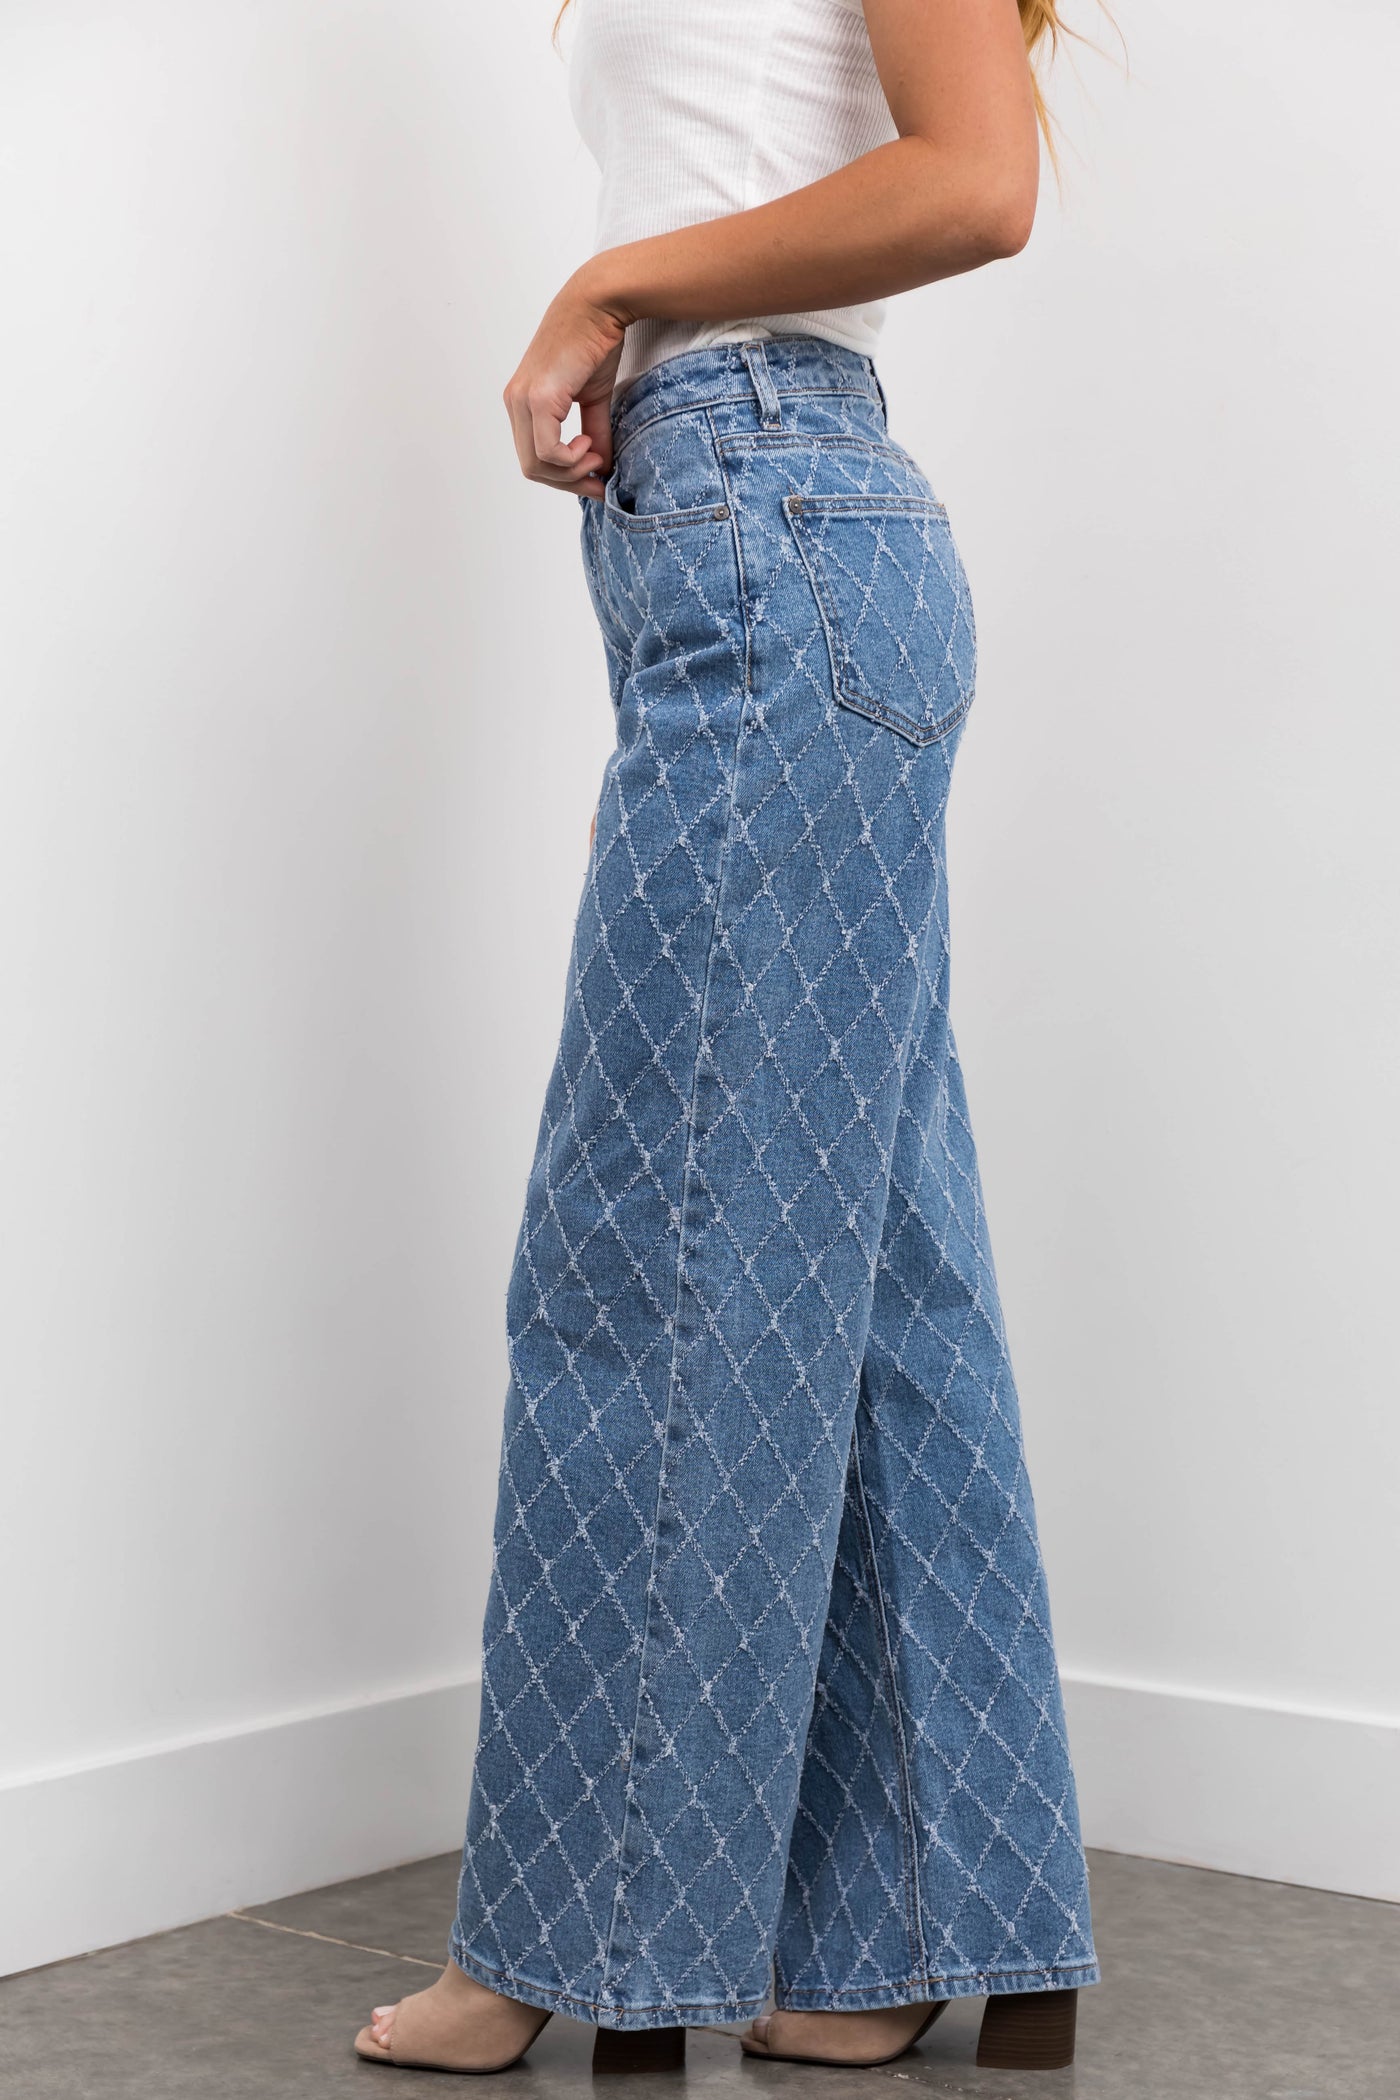 Special A Medium Wash Quilted Pattern Jeans